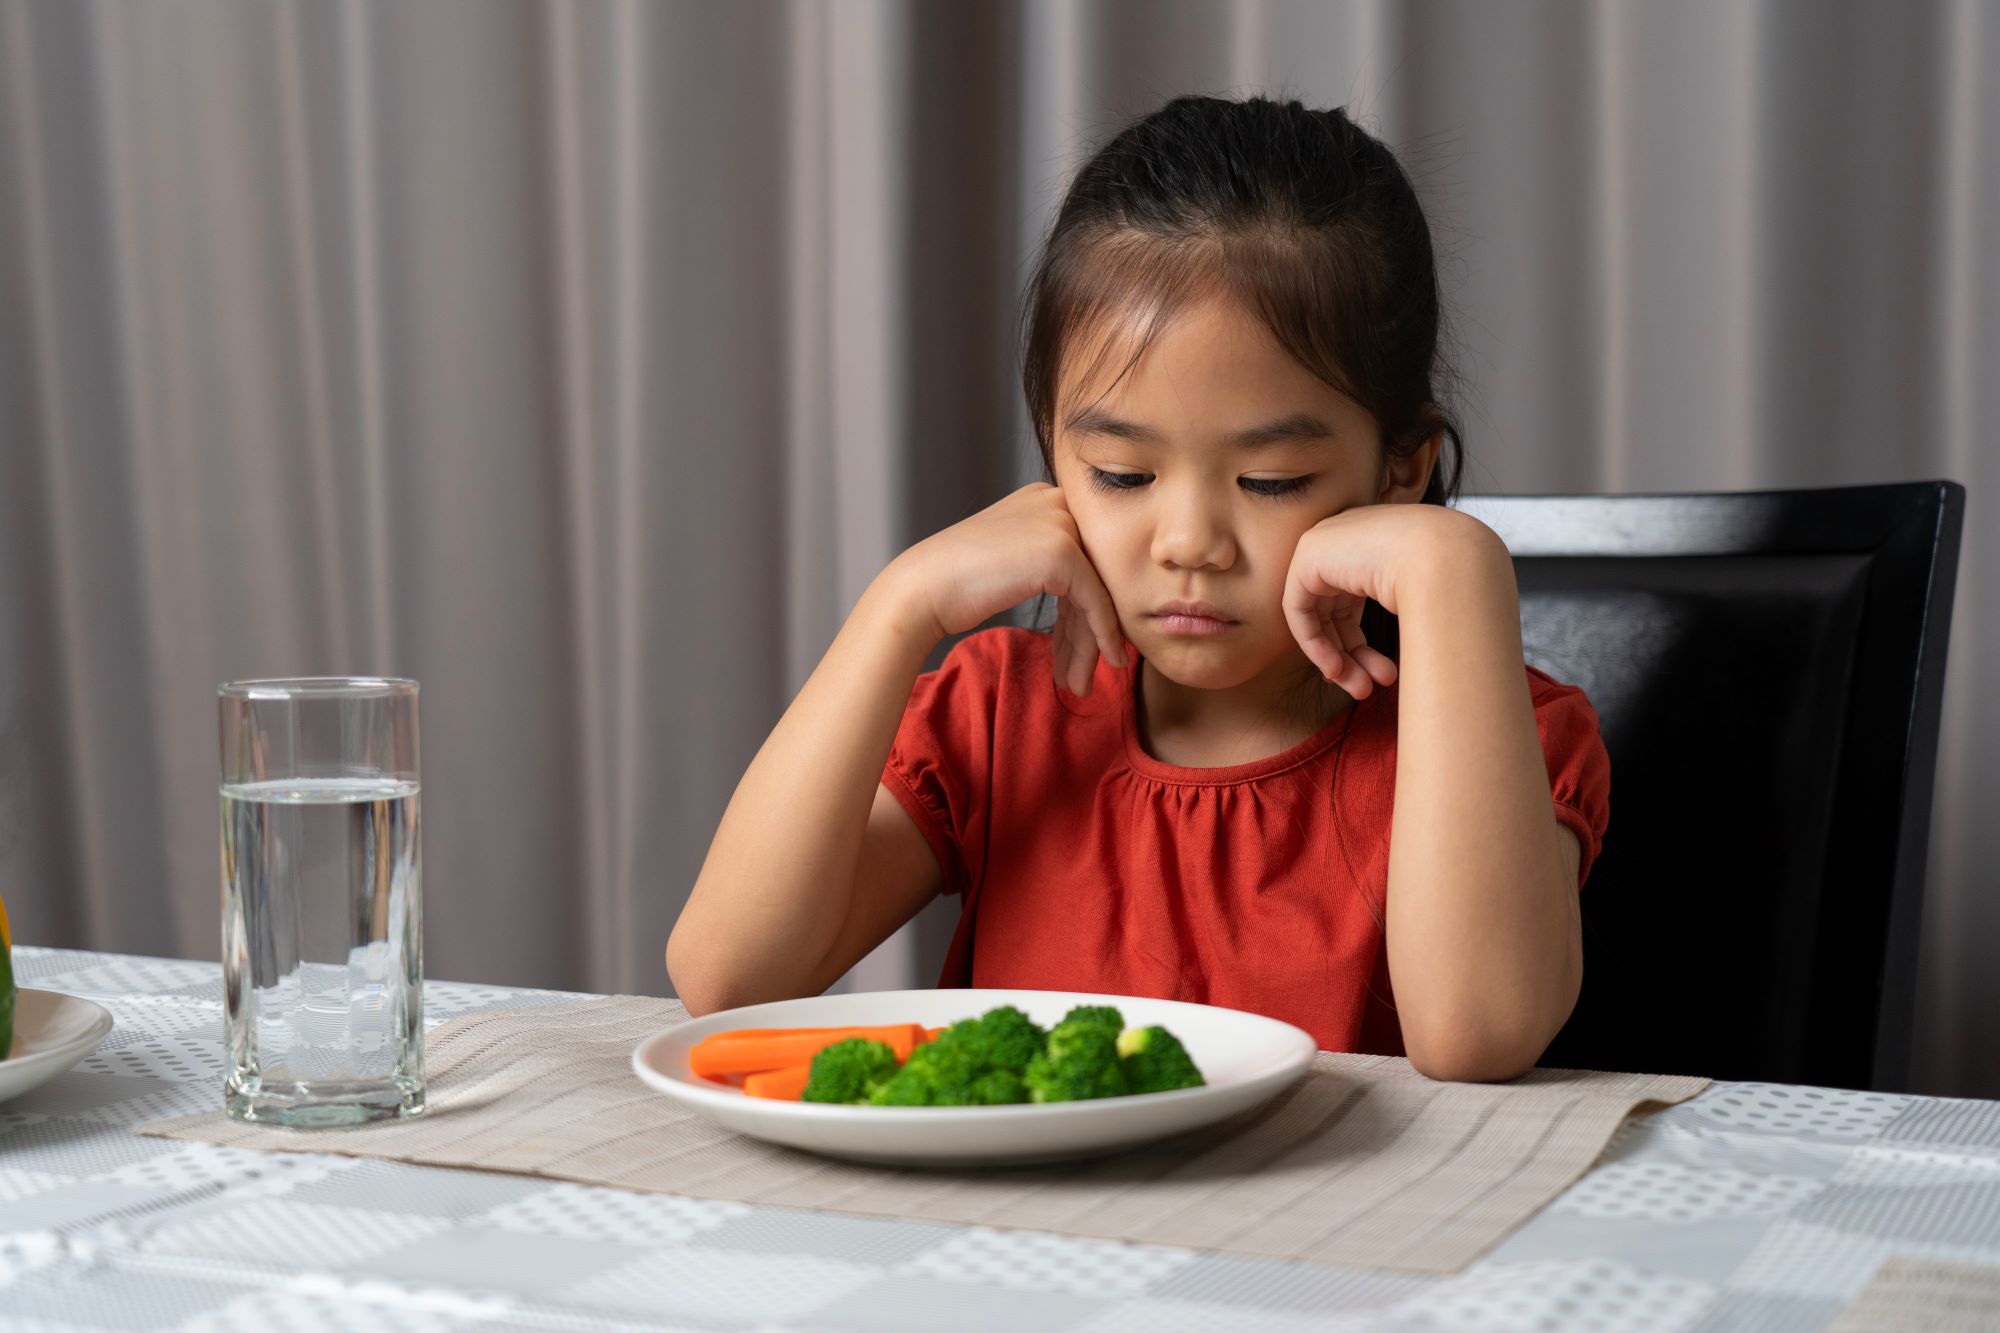 Child refusing to eat dinner at home